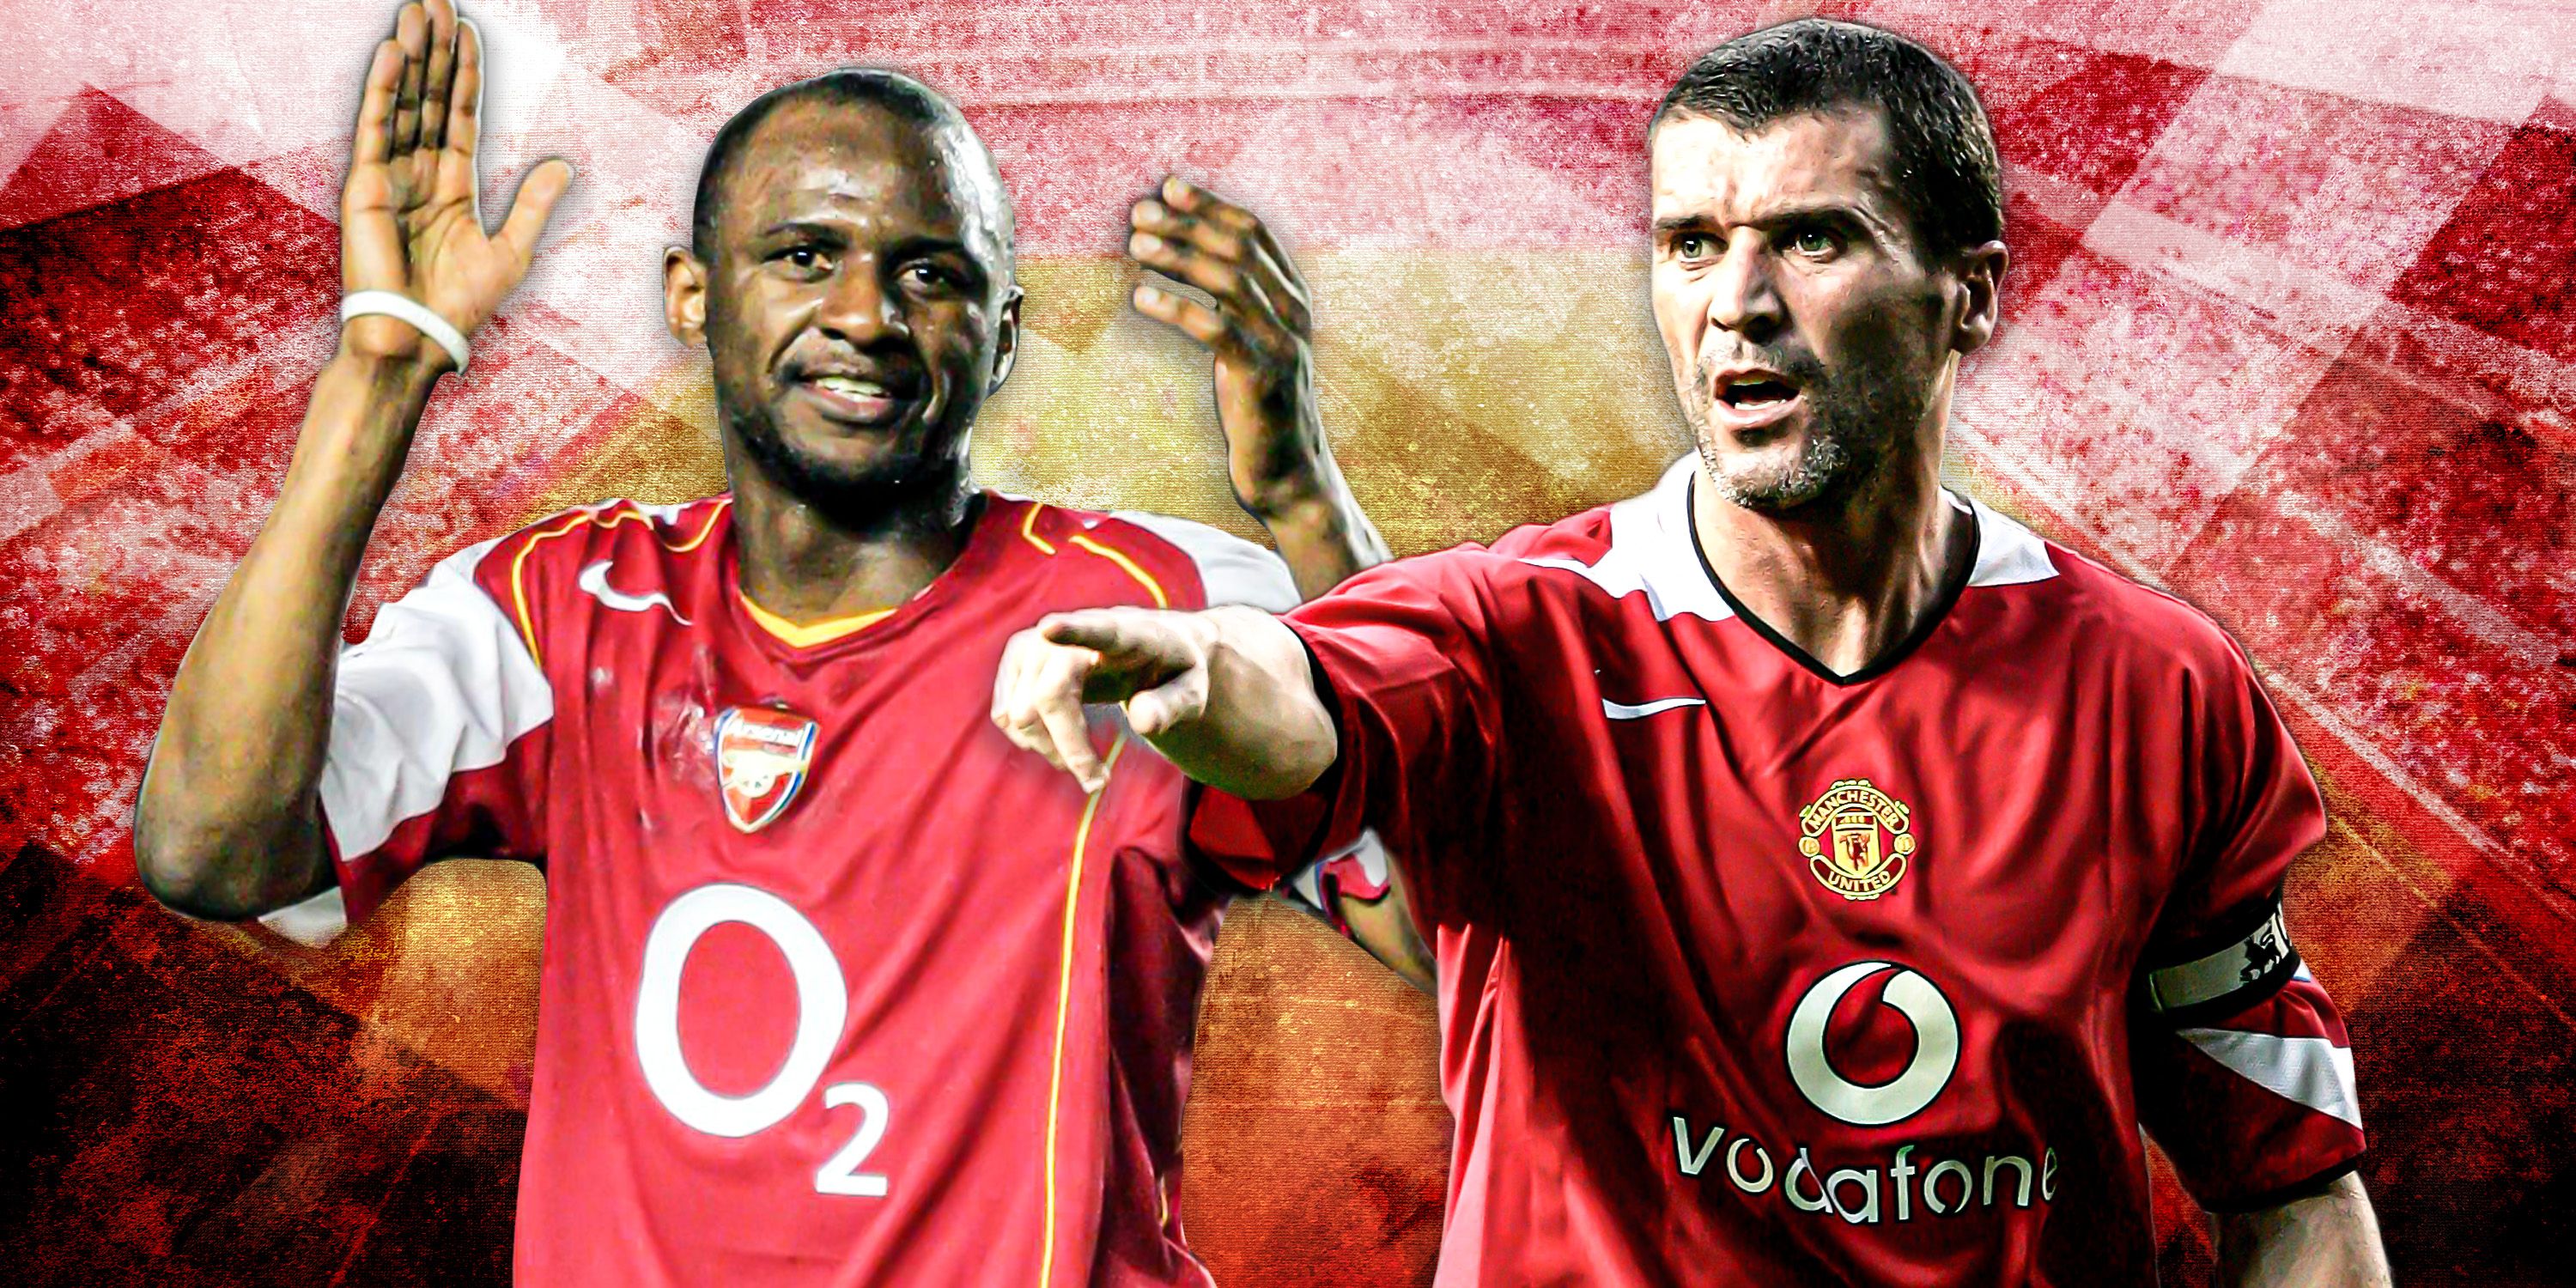 Arsenal's Patrick Vieira and Manchester United's Roy Keane.